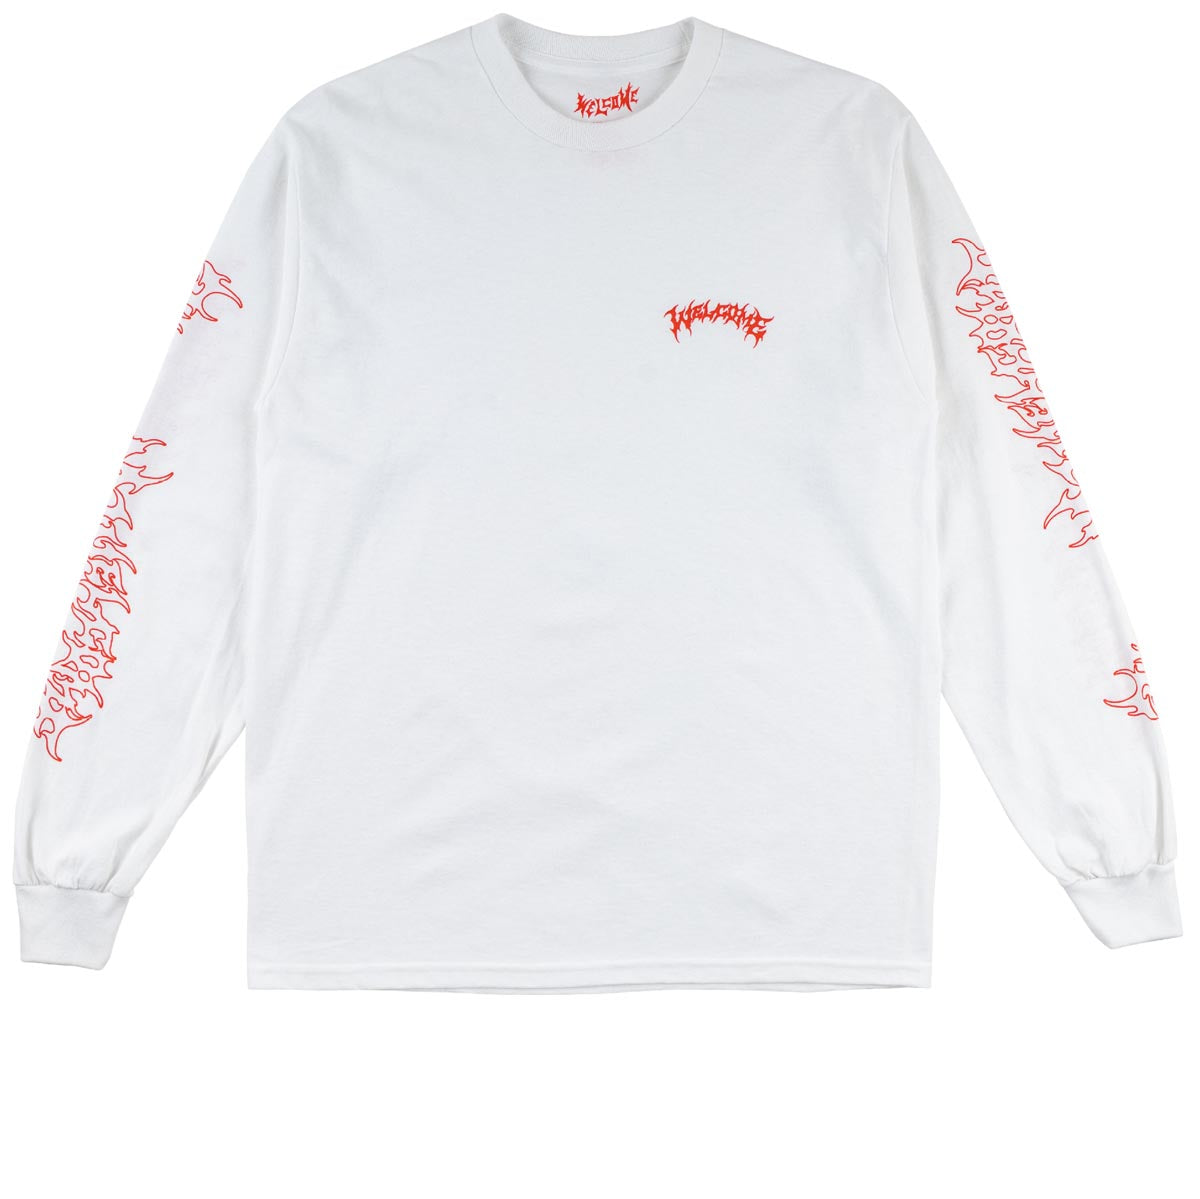 Welcome Barb Long Sleeve T-Shirt - White/Red image 1